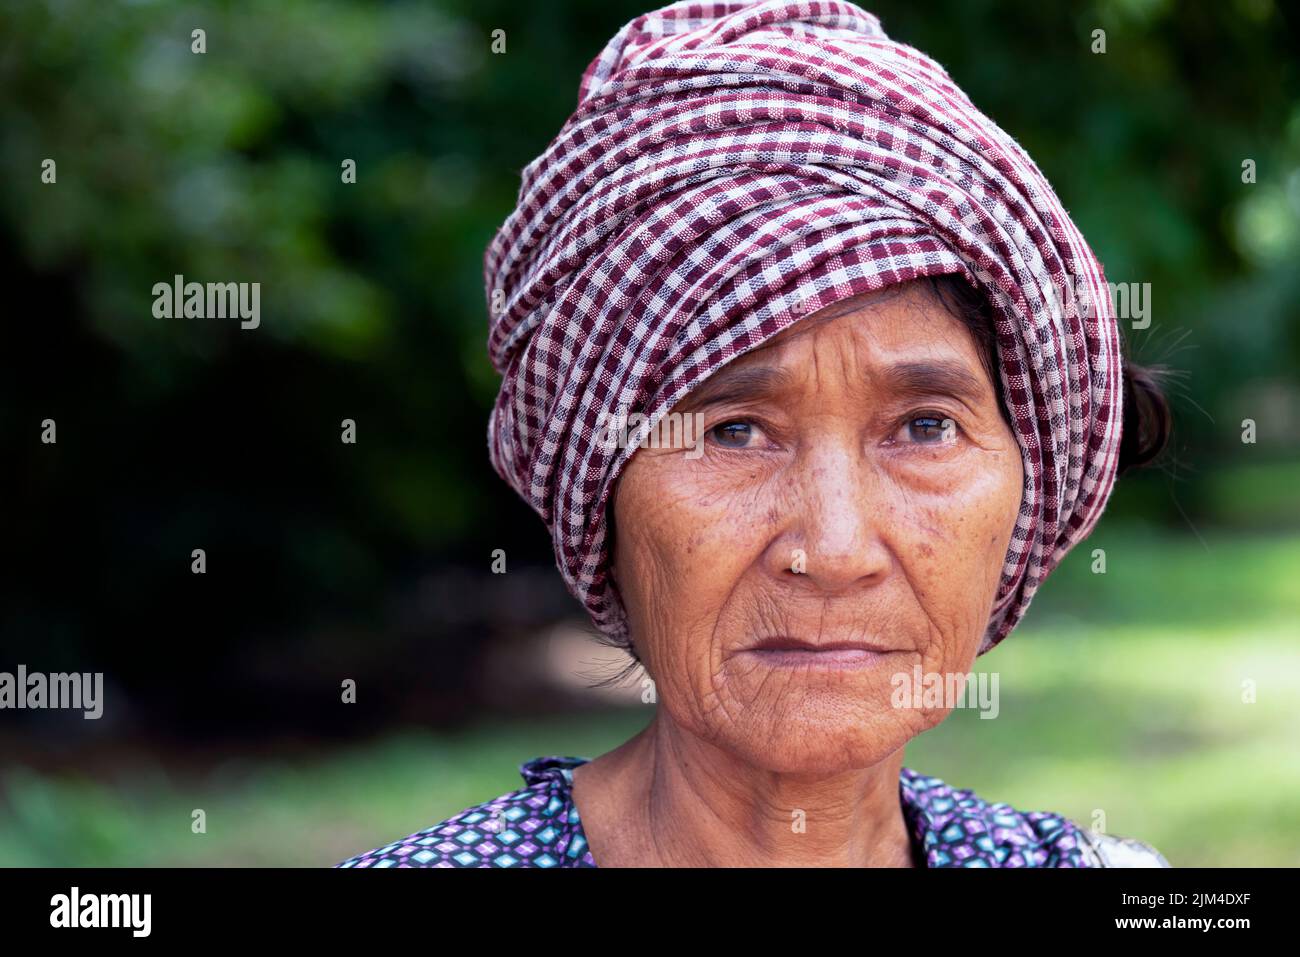 Khmer woman wearing krama, traditional scarf made of cotton Stock Photo